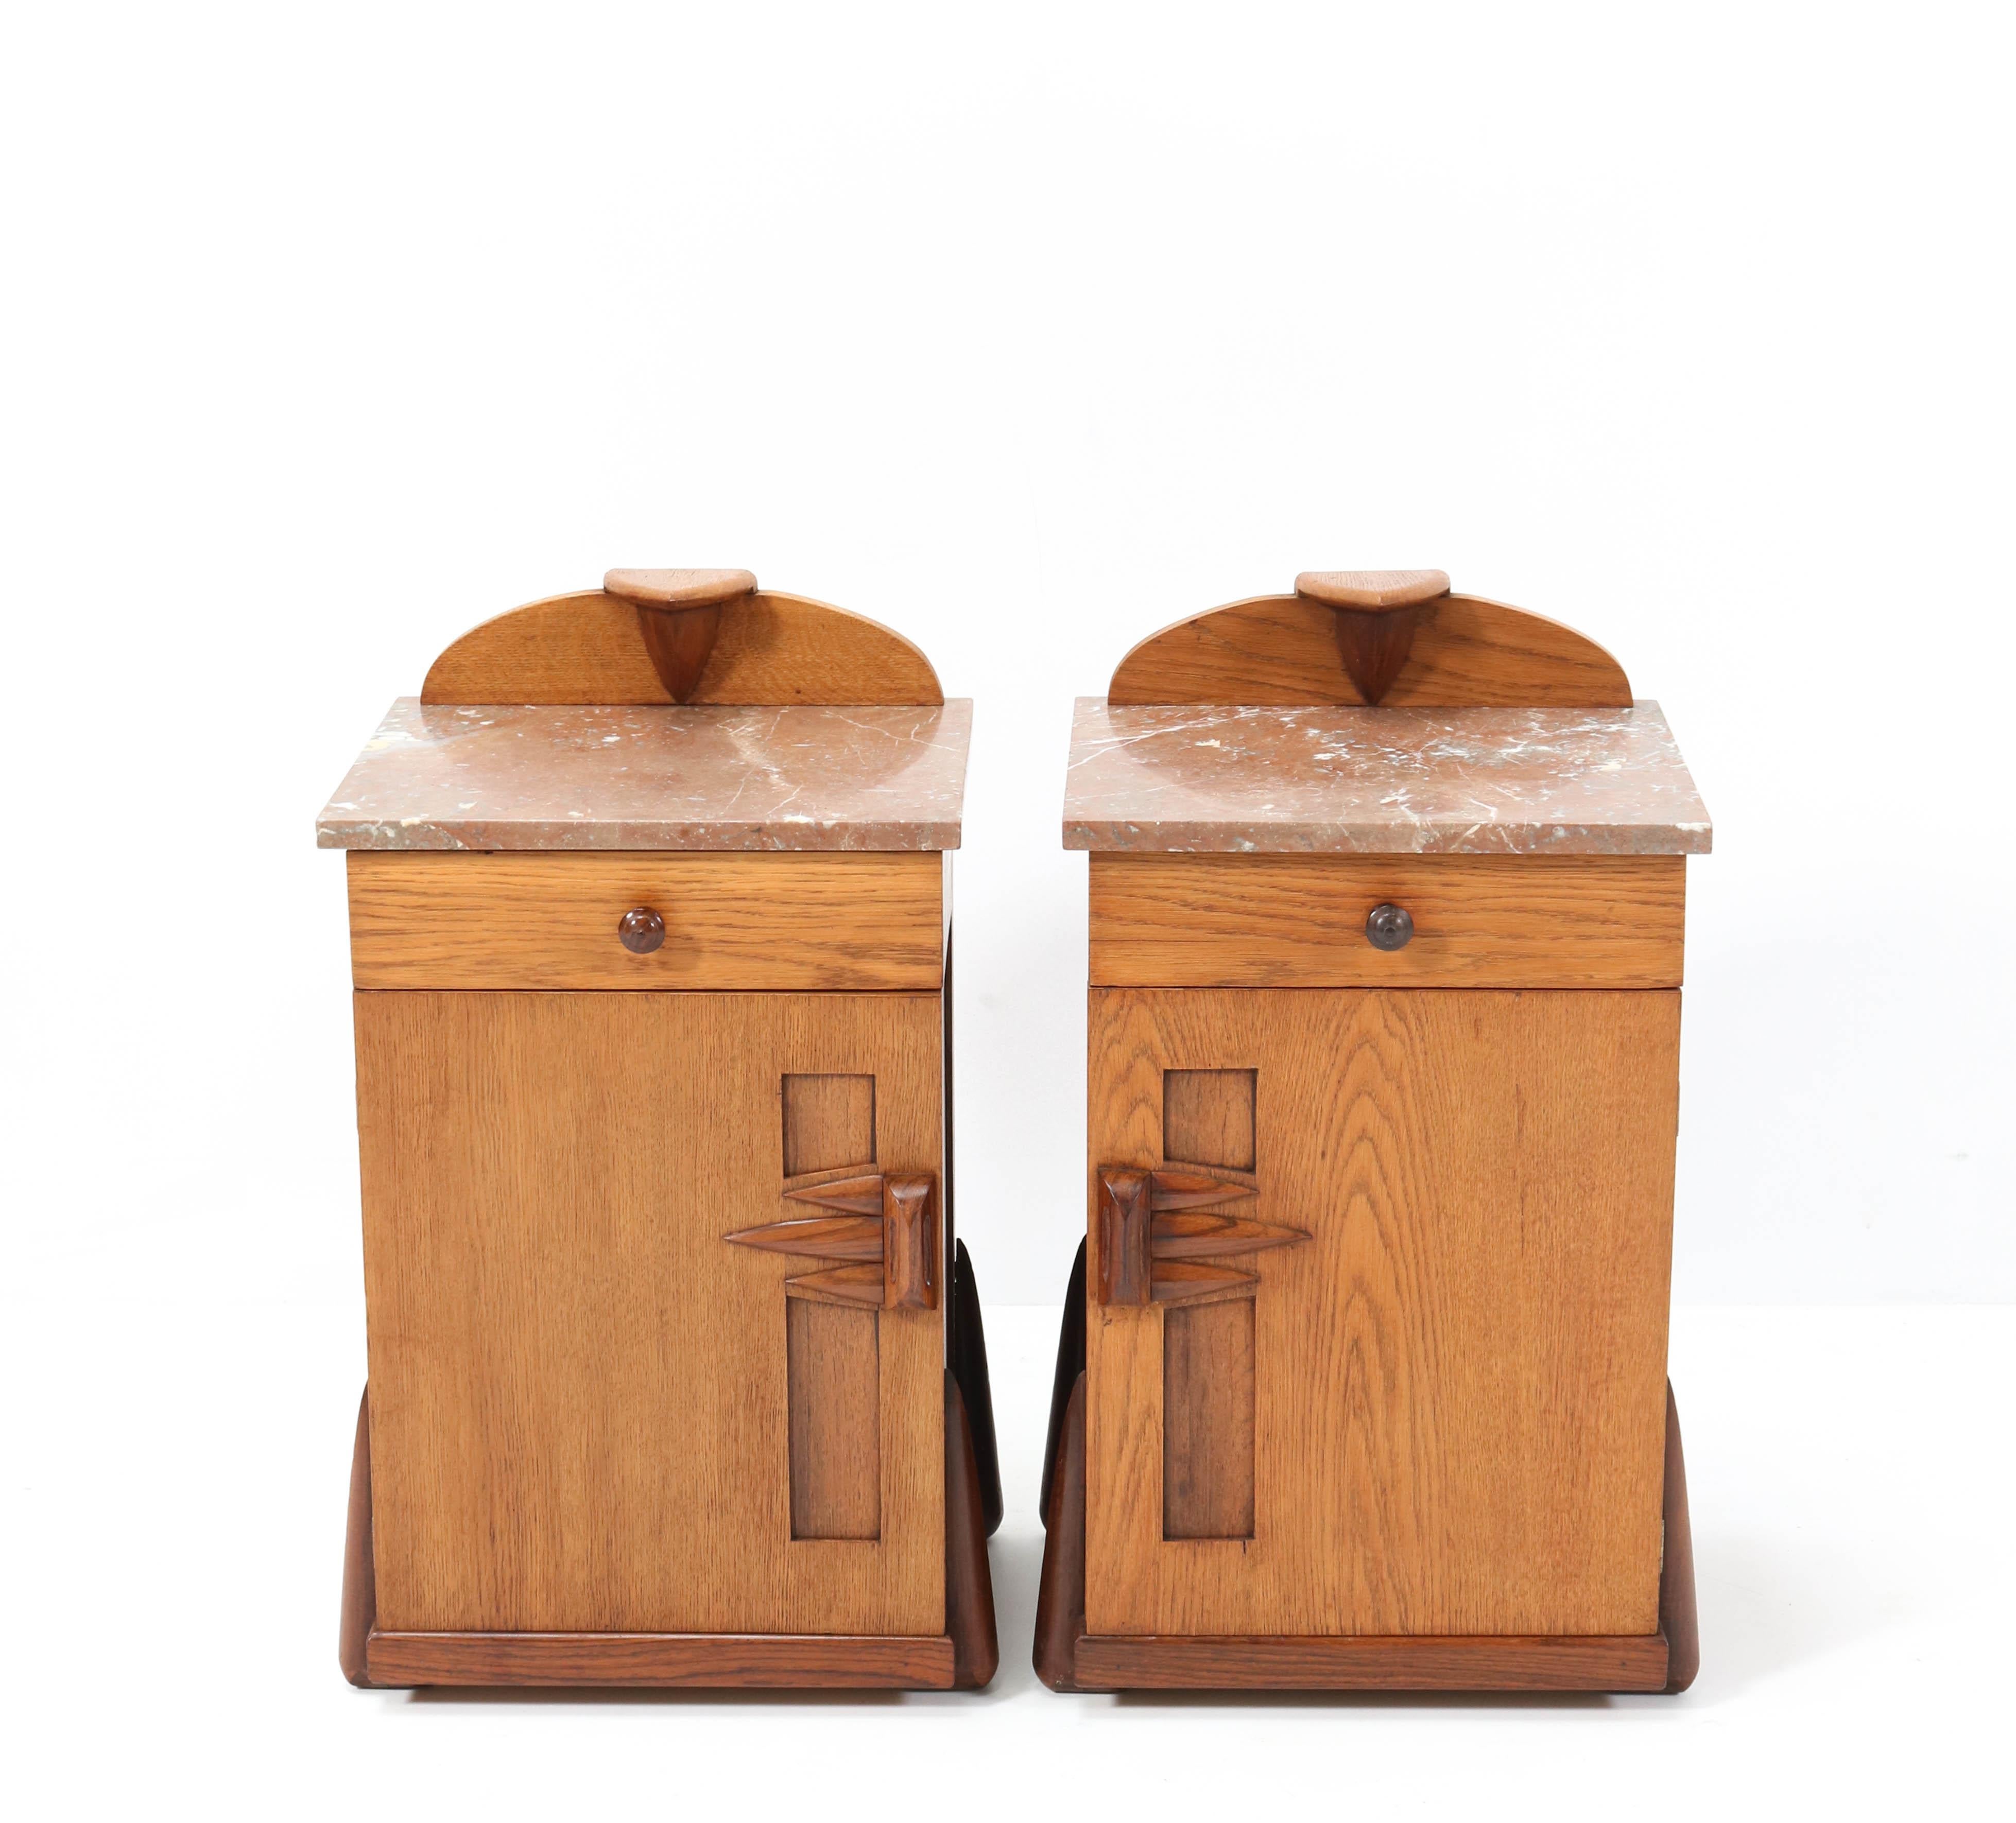 Magnificent and ultra rare pair of nightstands or bedside tables.
Design by Max Coini Amsterdam.
Striking Dutch design from the 1920s.
Solid oak and original oak veneer with solid padouk handles and knobs and lining.
Original multi-colored